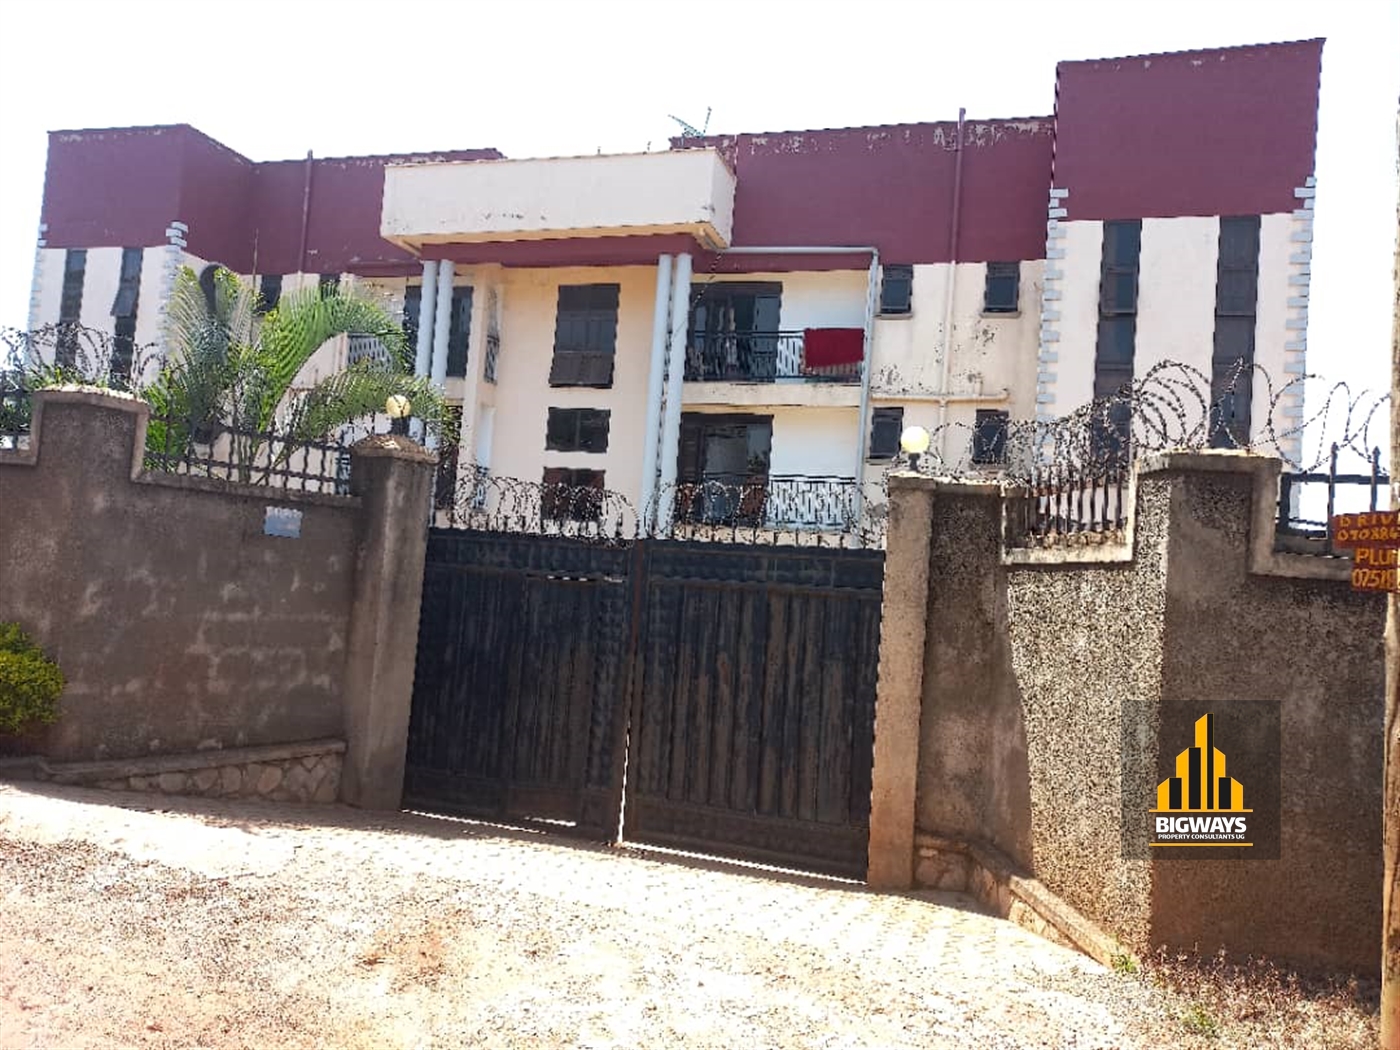 Apartment block for sale in Lubowa Wakiso